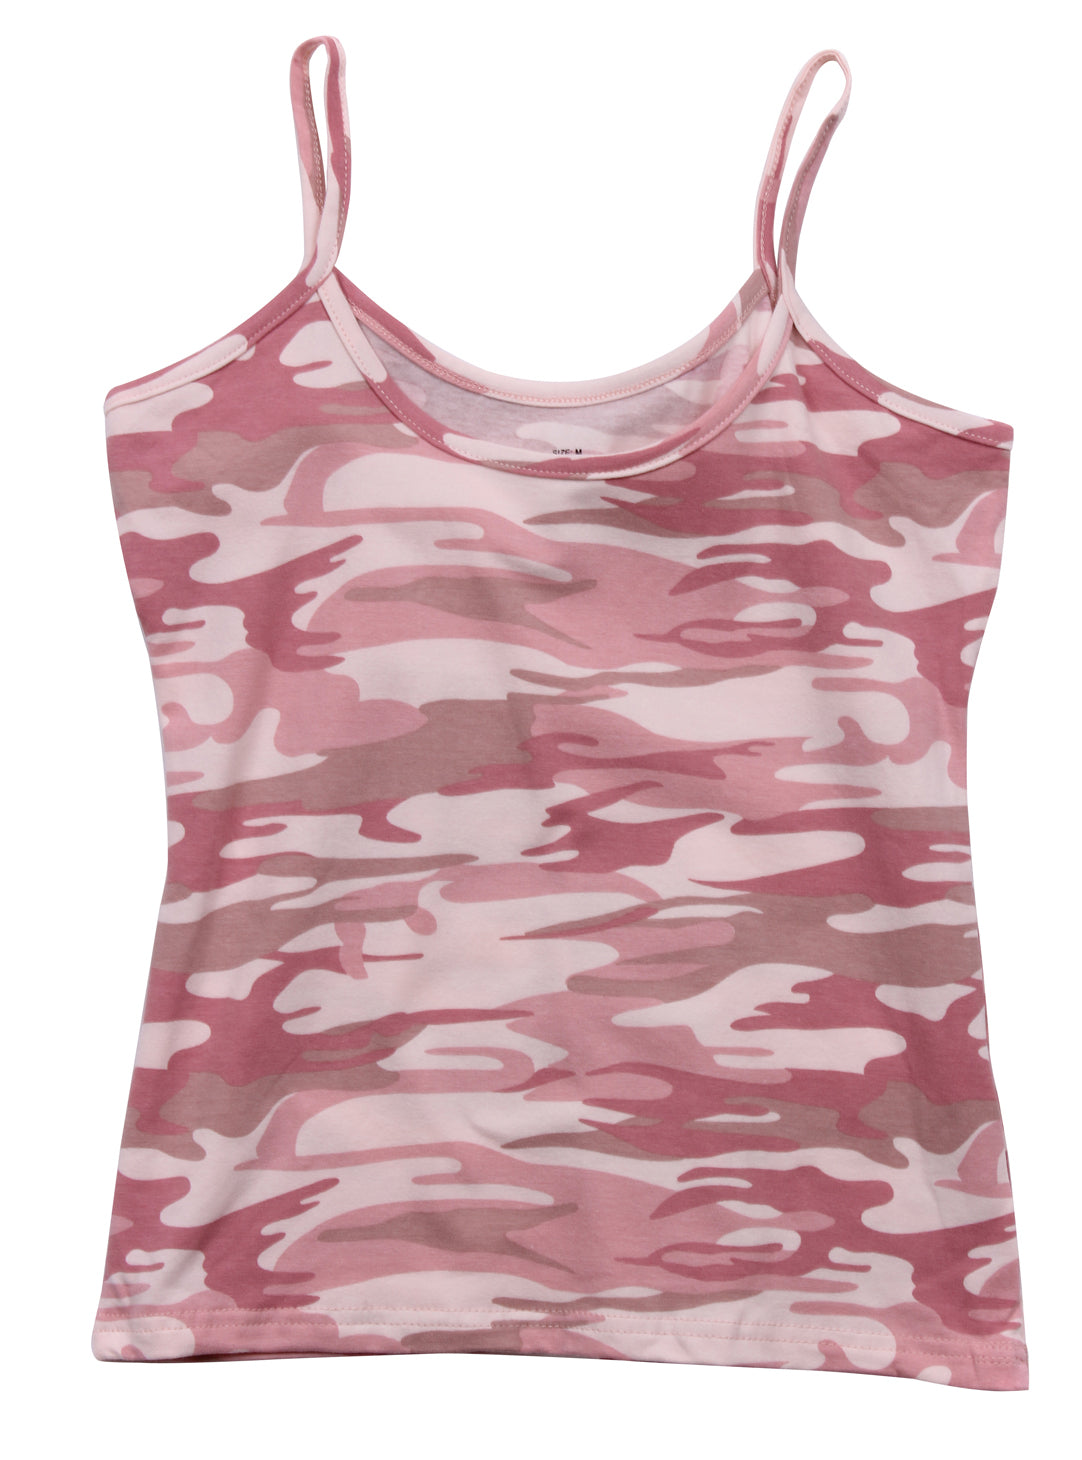 Baby Pink Camo "Booty Camp" Booty Shorts & Tank Top - Tactical Choice Plus